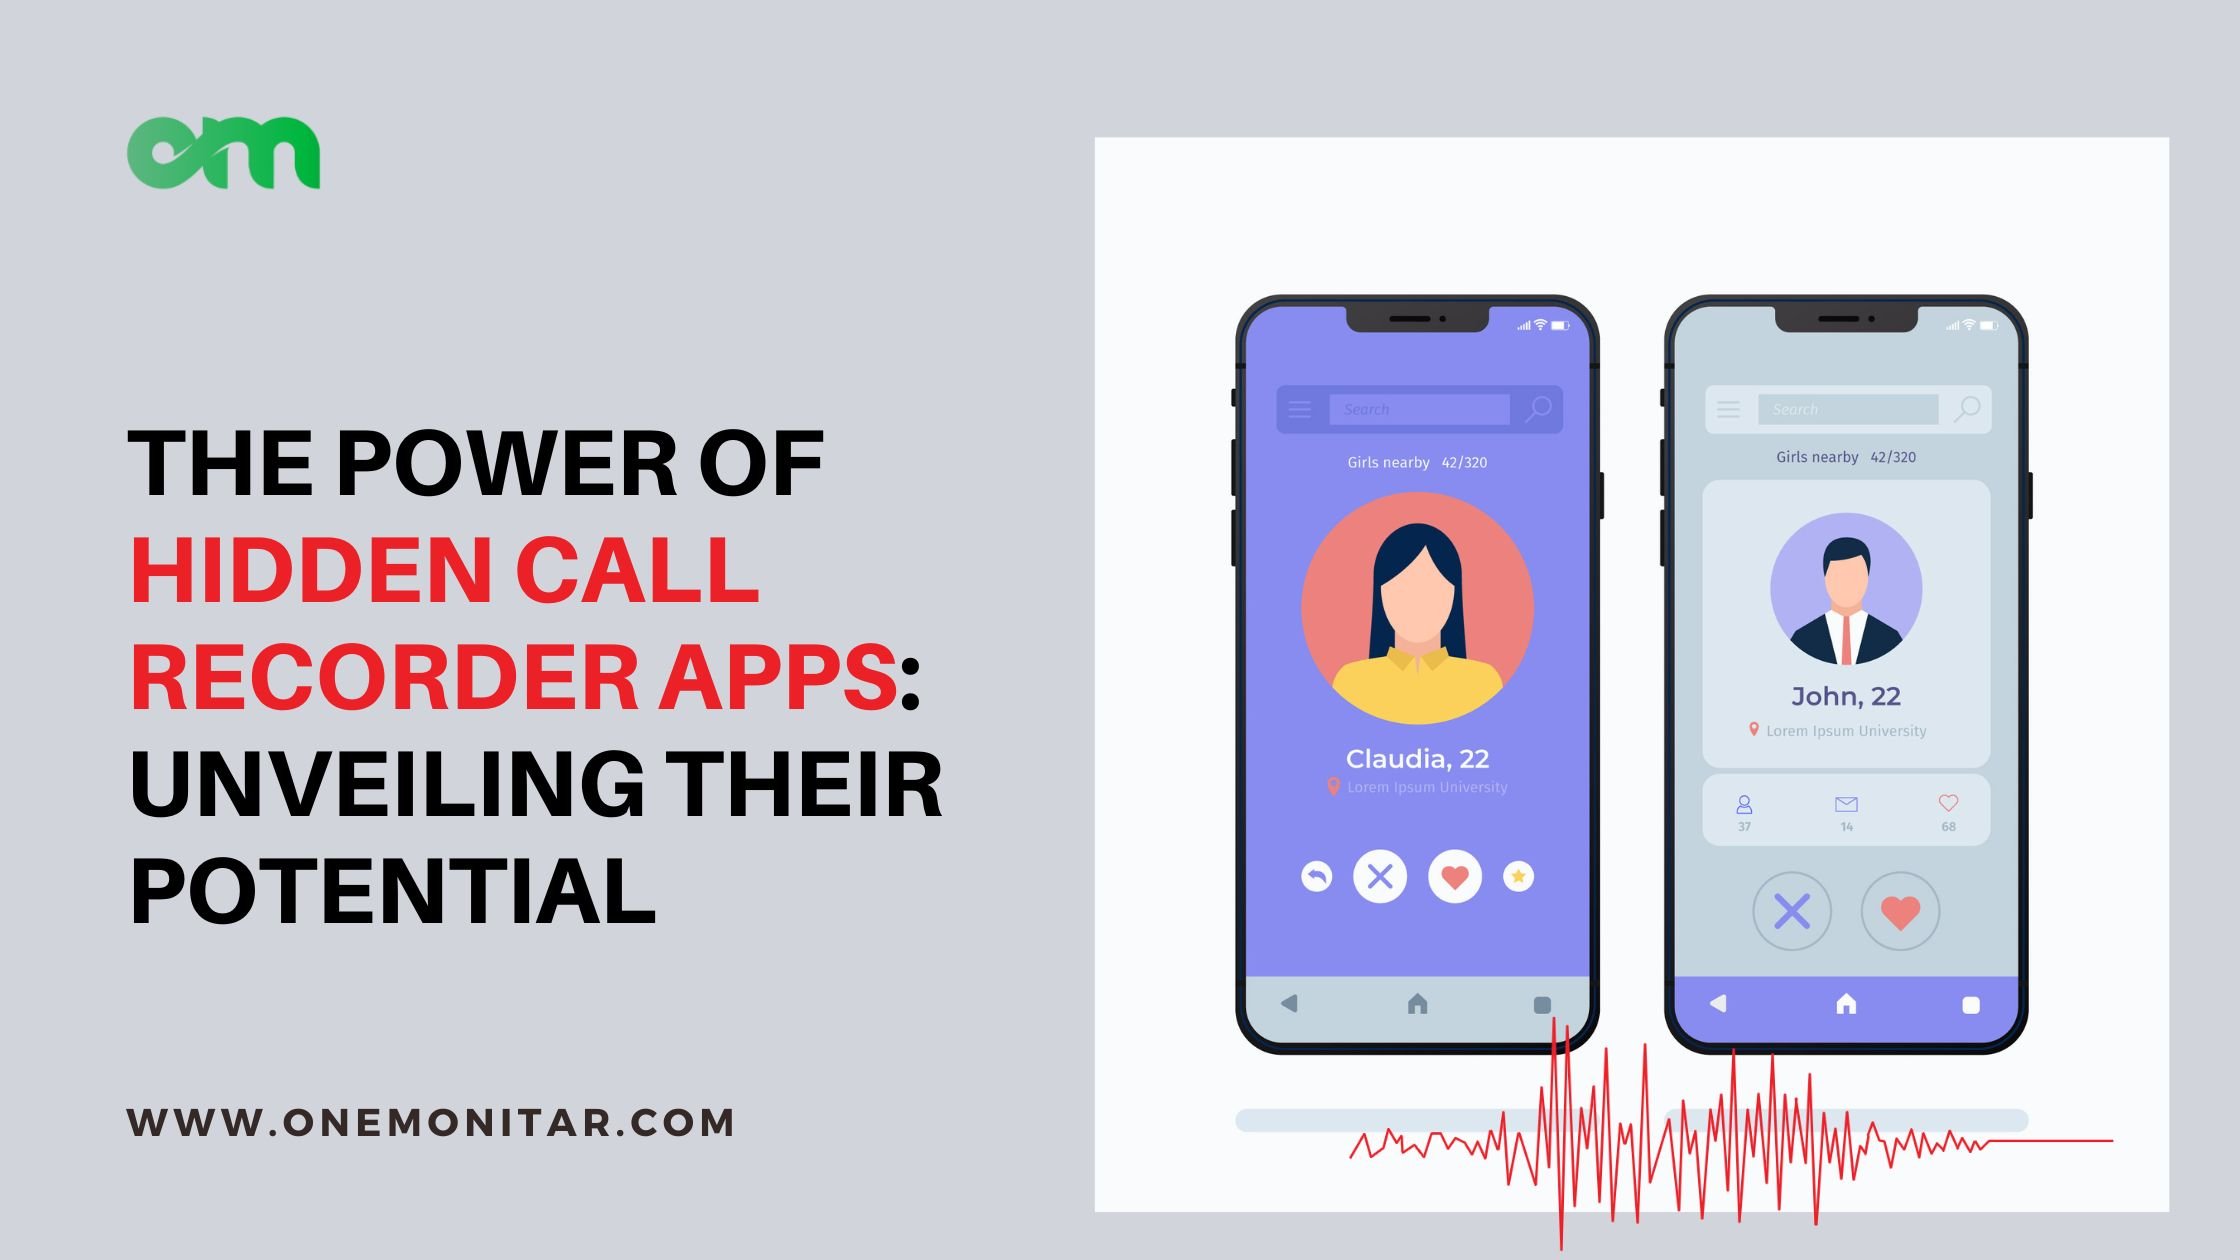 The Power of Hidden Call Recorder Apps: Unveiling Their Potential